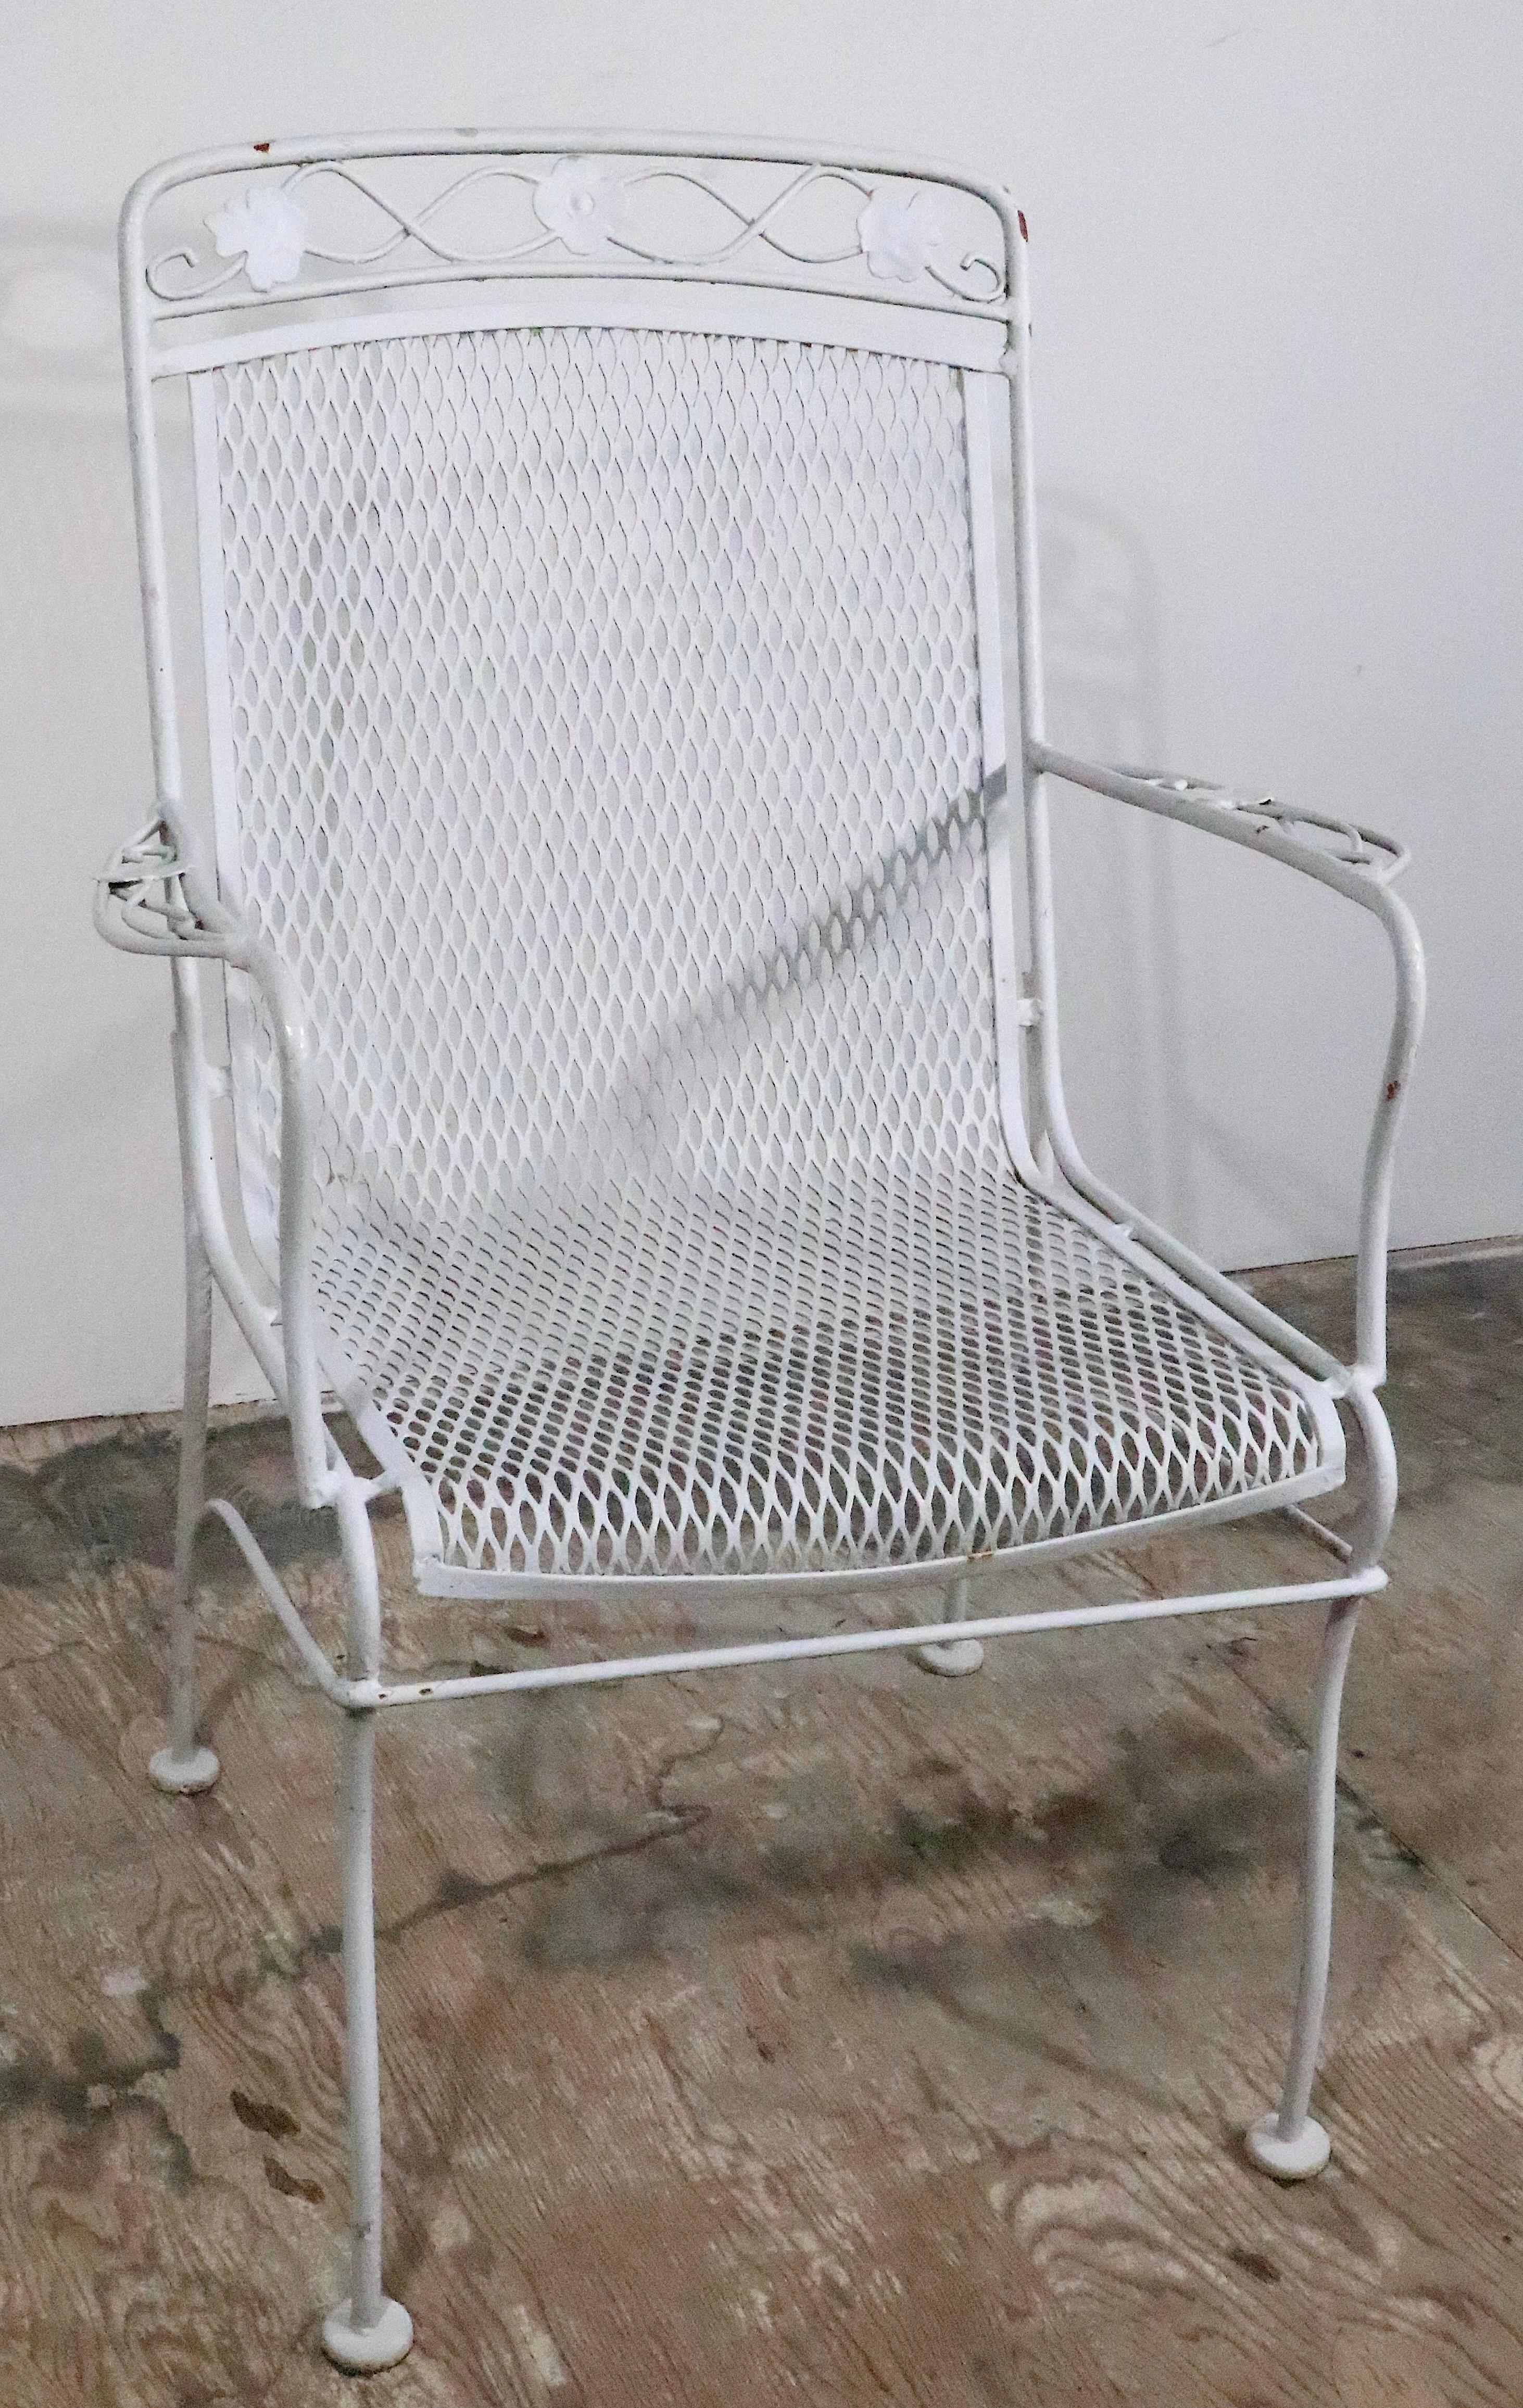 Pr. Wrought Iron Metal Mesh Garden Patio Poolside Chairs by Woodard c. 1950/70's For Sale 5